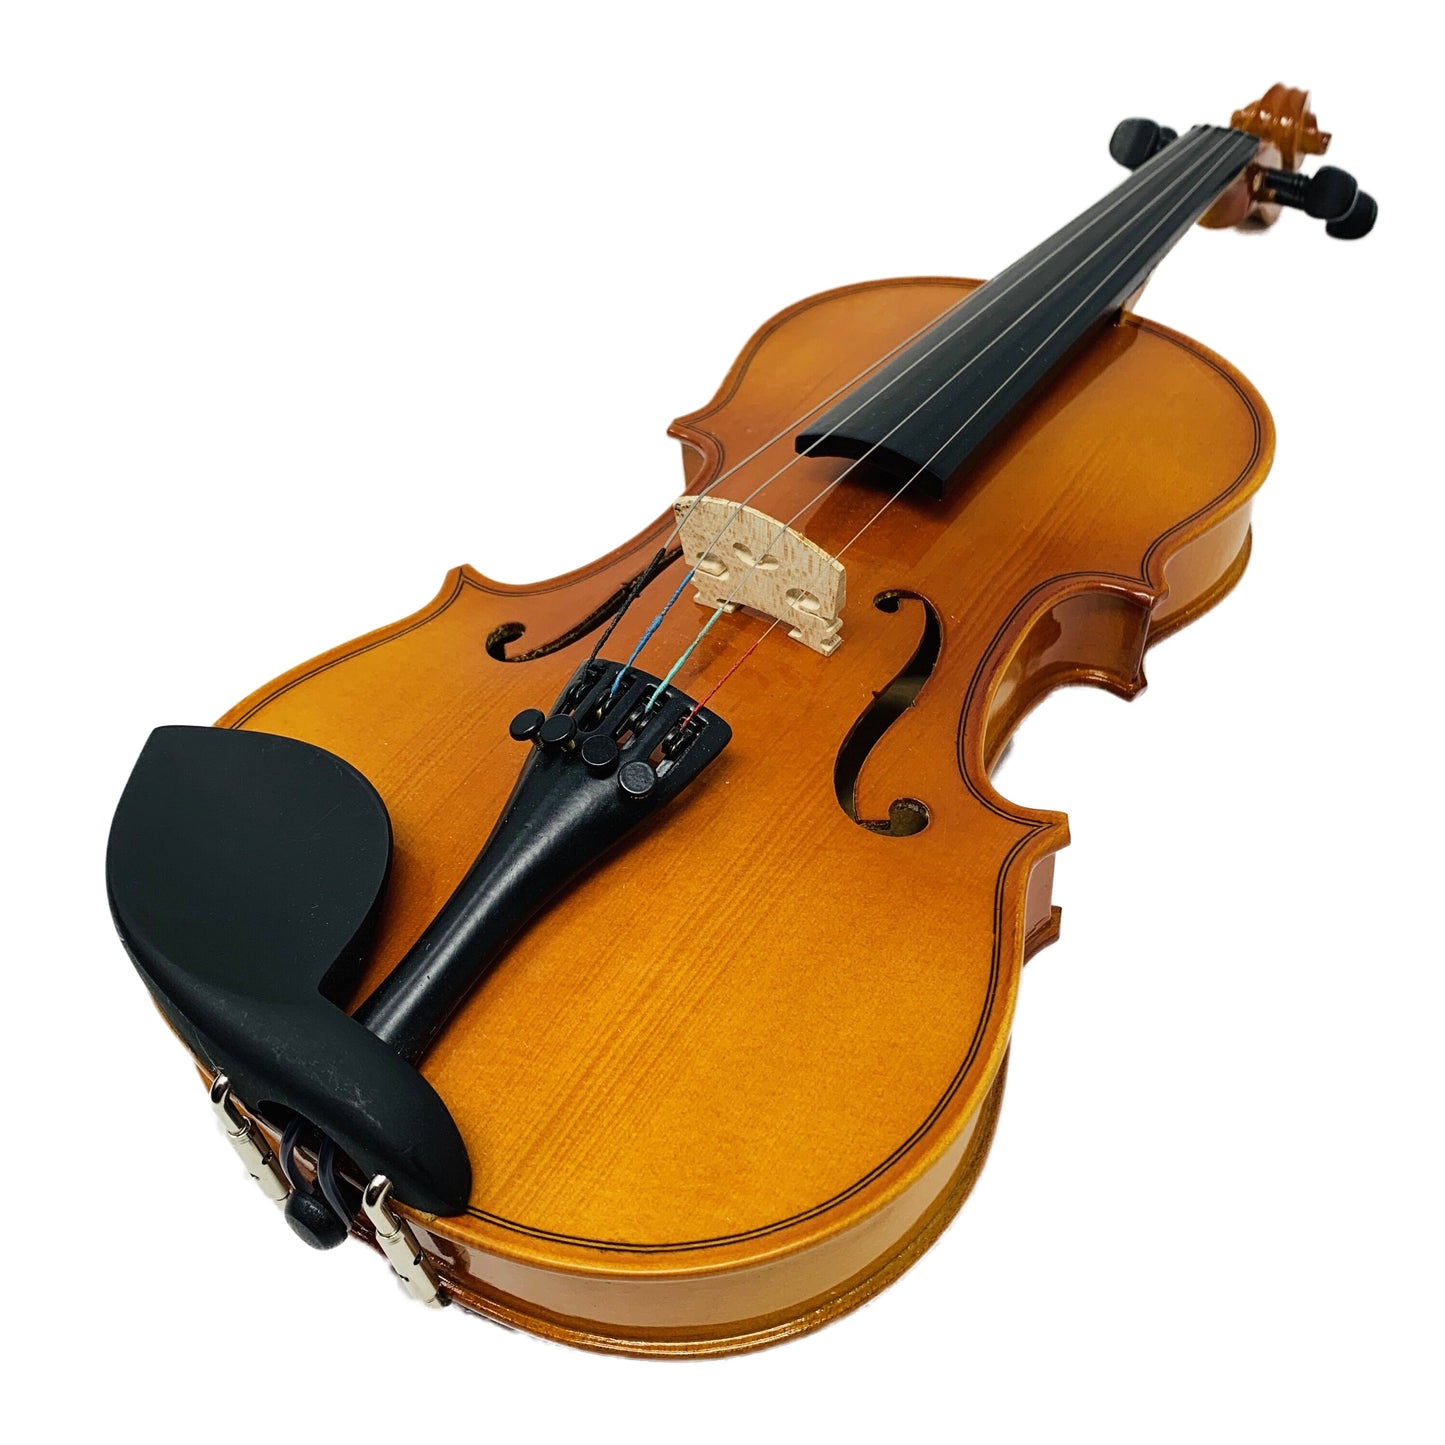 Kalena Spruce Top Violin  1/4 size includes hard case with bow, shoulder rest and rosin